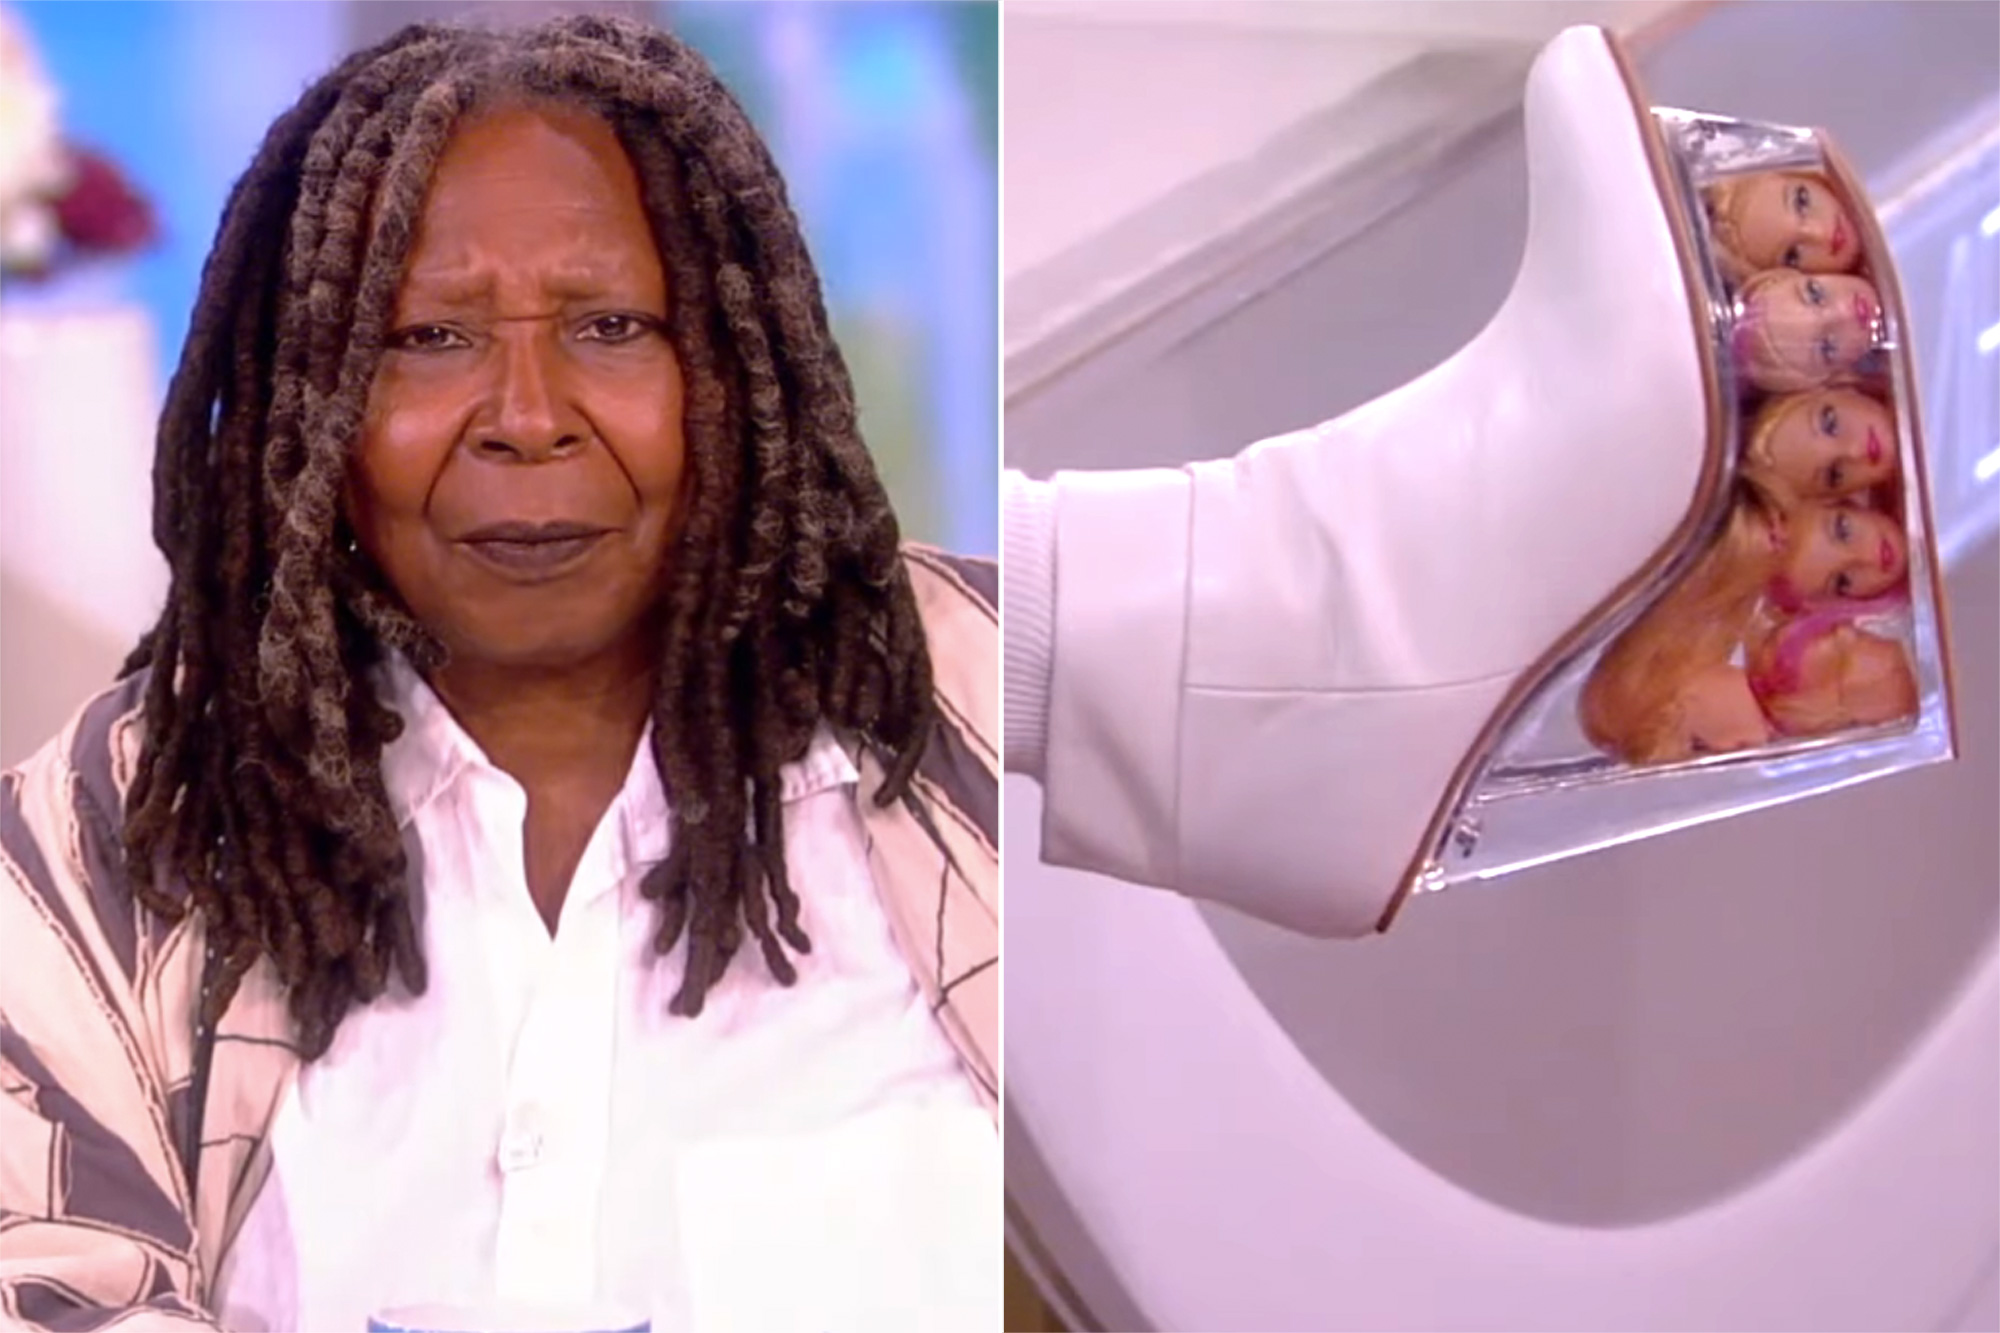 Whoopi Goldberg shows off decapitated Barbie heads in her shoes on 'The View'